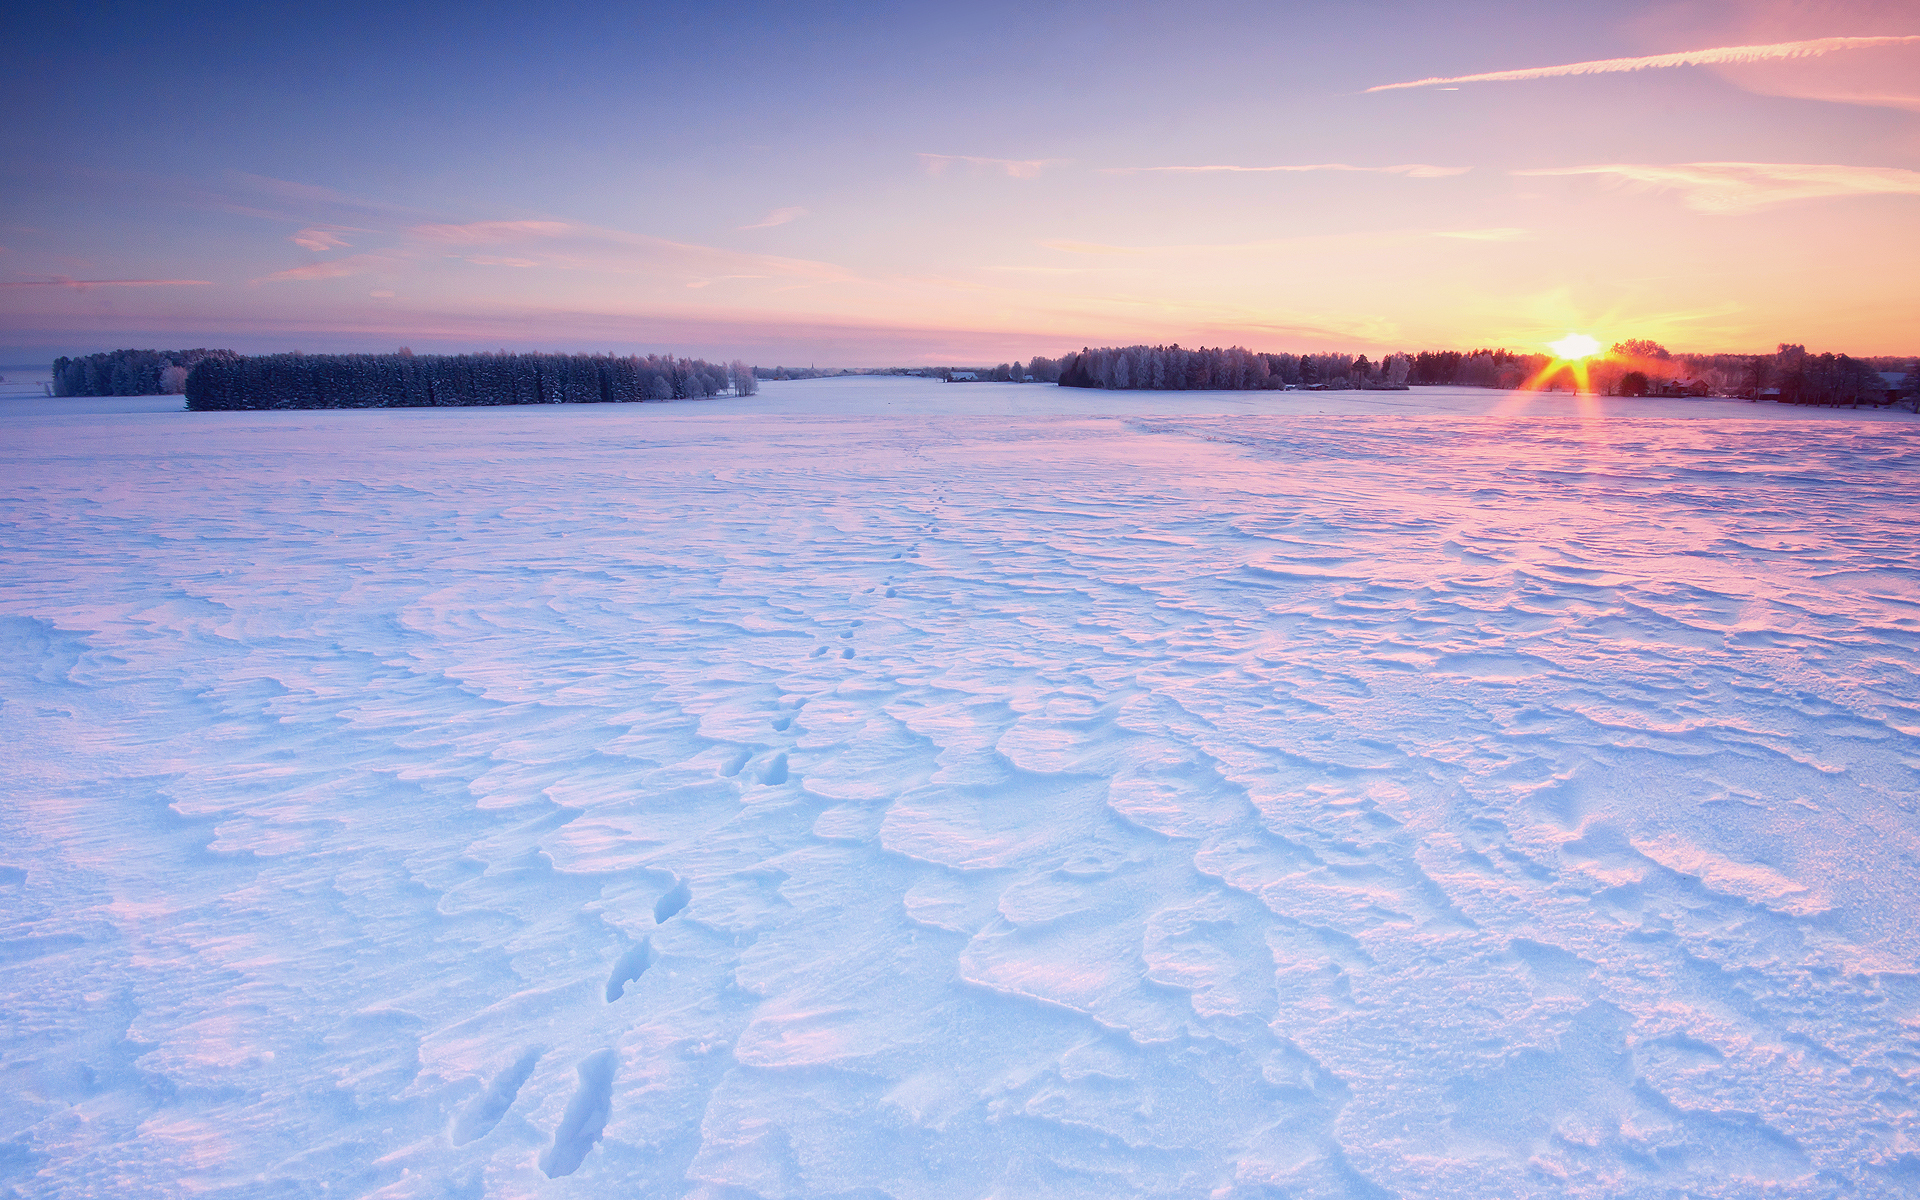 24338 1440x900 PC pictures for free, download sunset, landscape, snow, winter 1440x900 wallpapers on your desktop